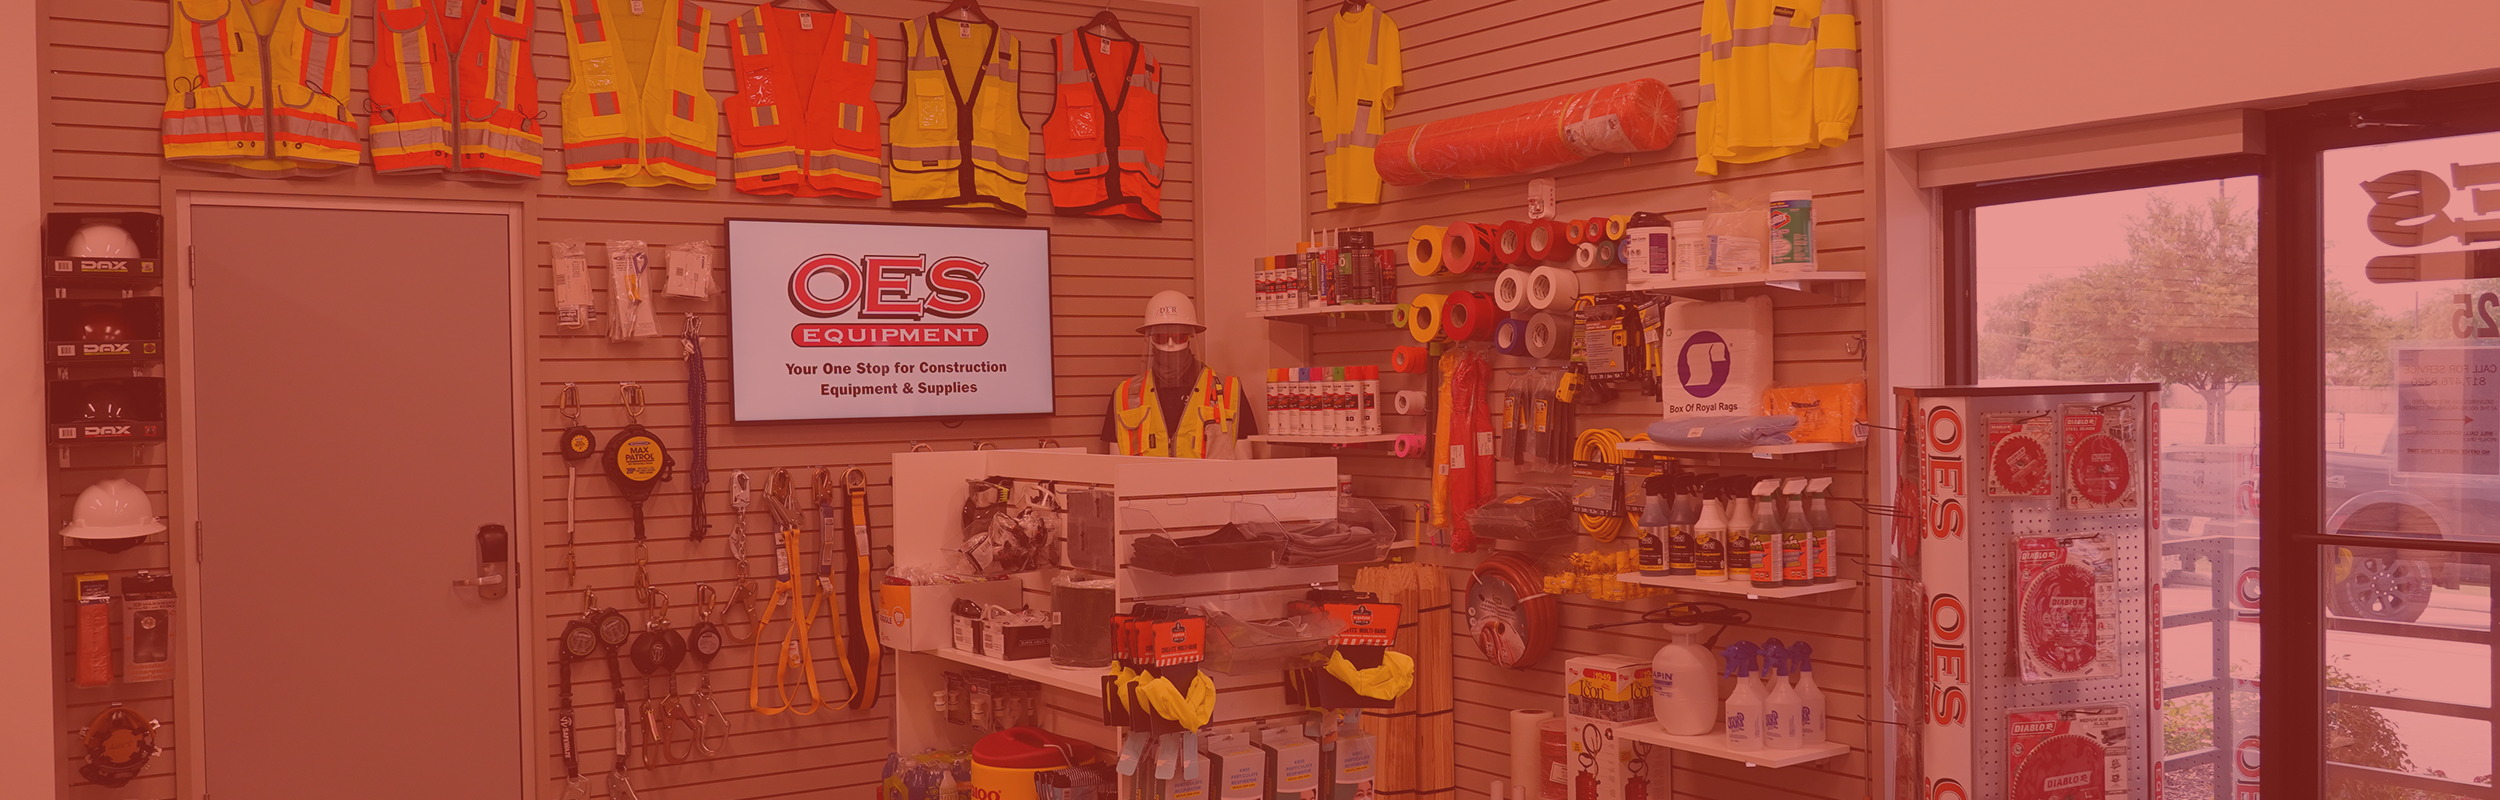 OES Equipment store